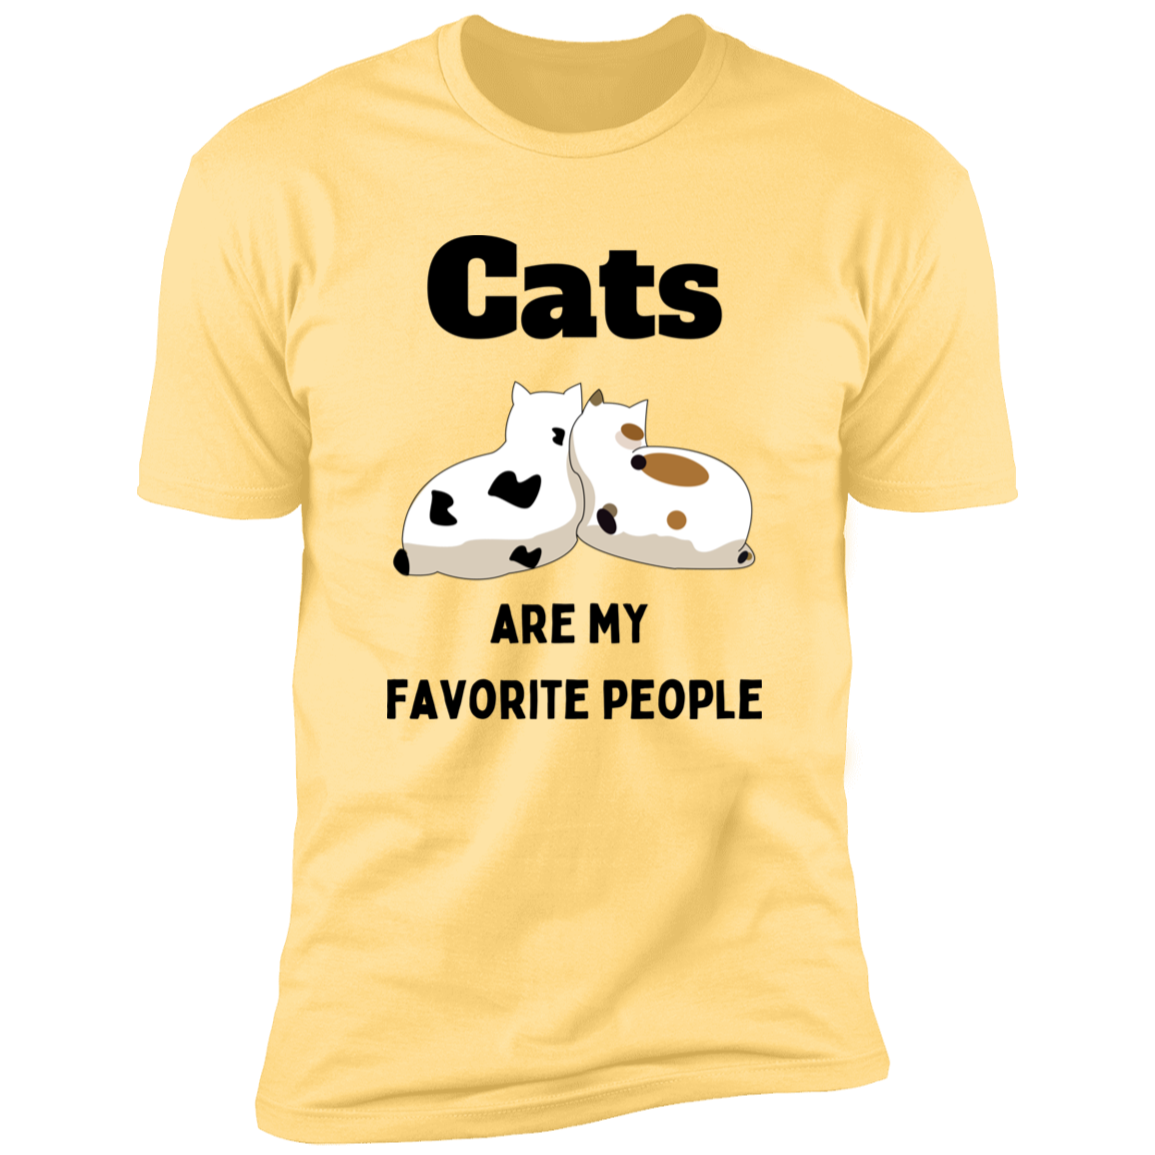 Cats Are My Favorite People T-shirt, Cat Shirt for humans, in banana cream